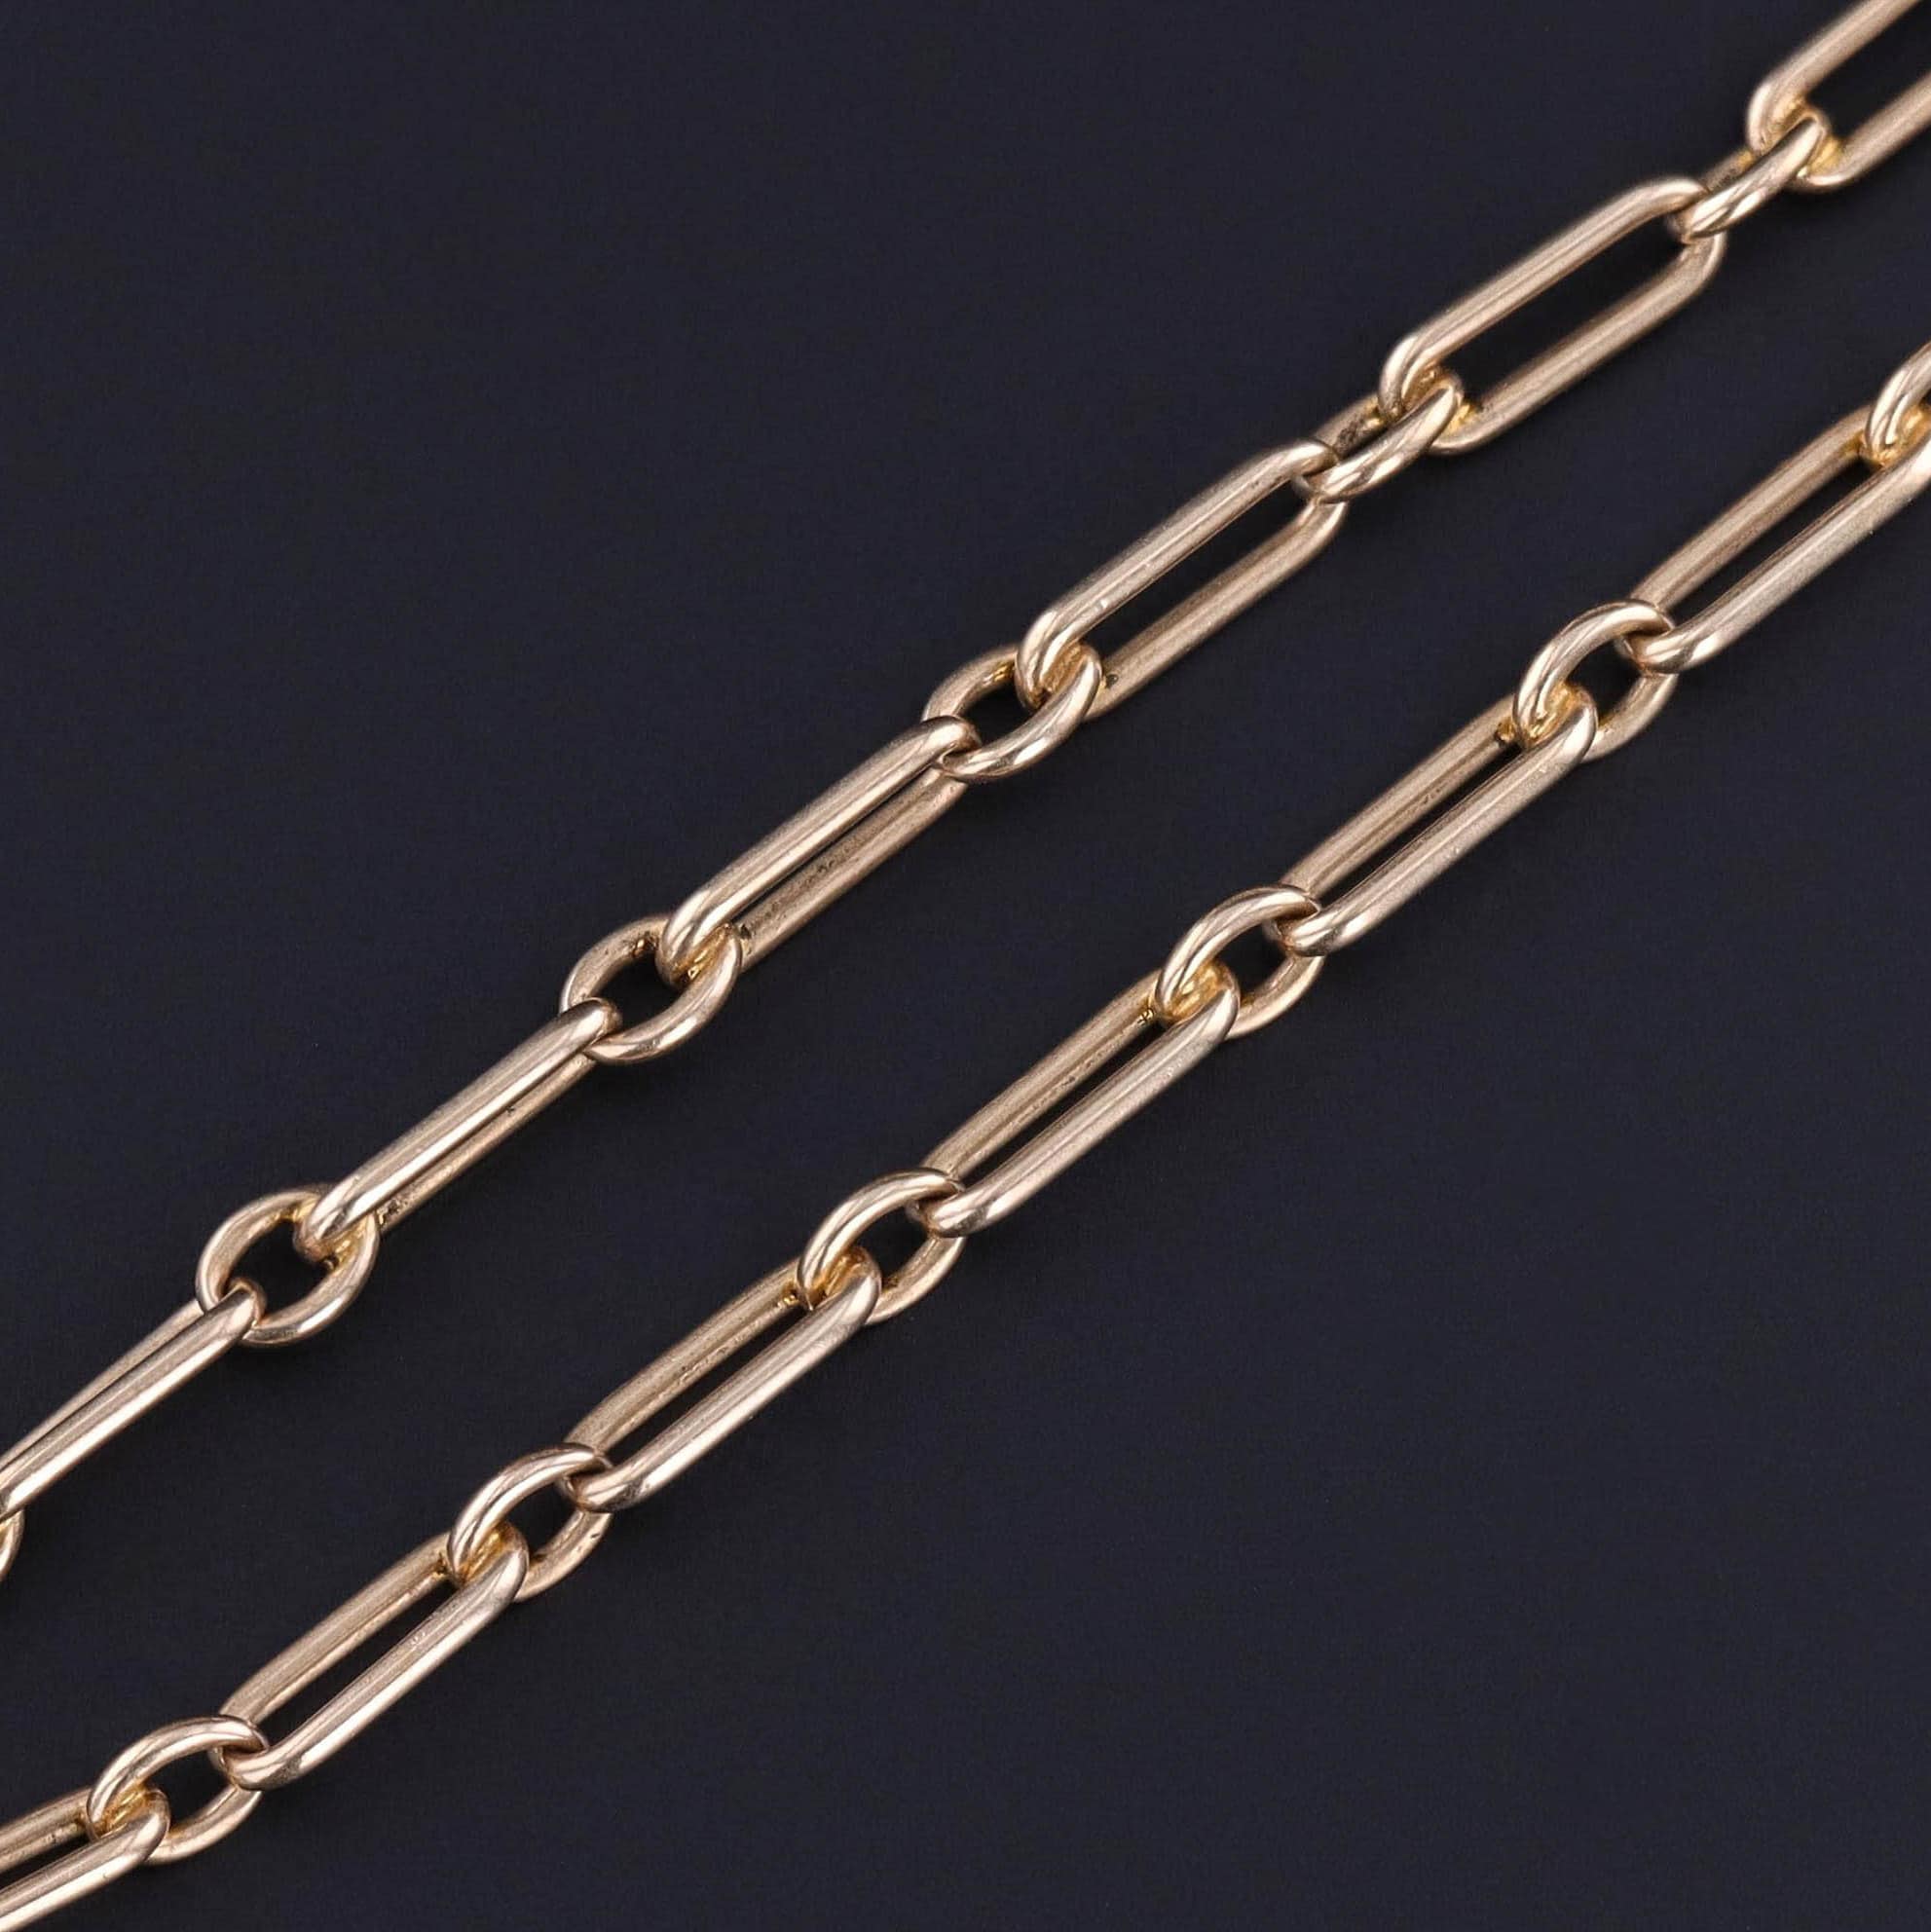 Antique Watch Chain of 14k Gold